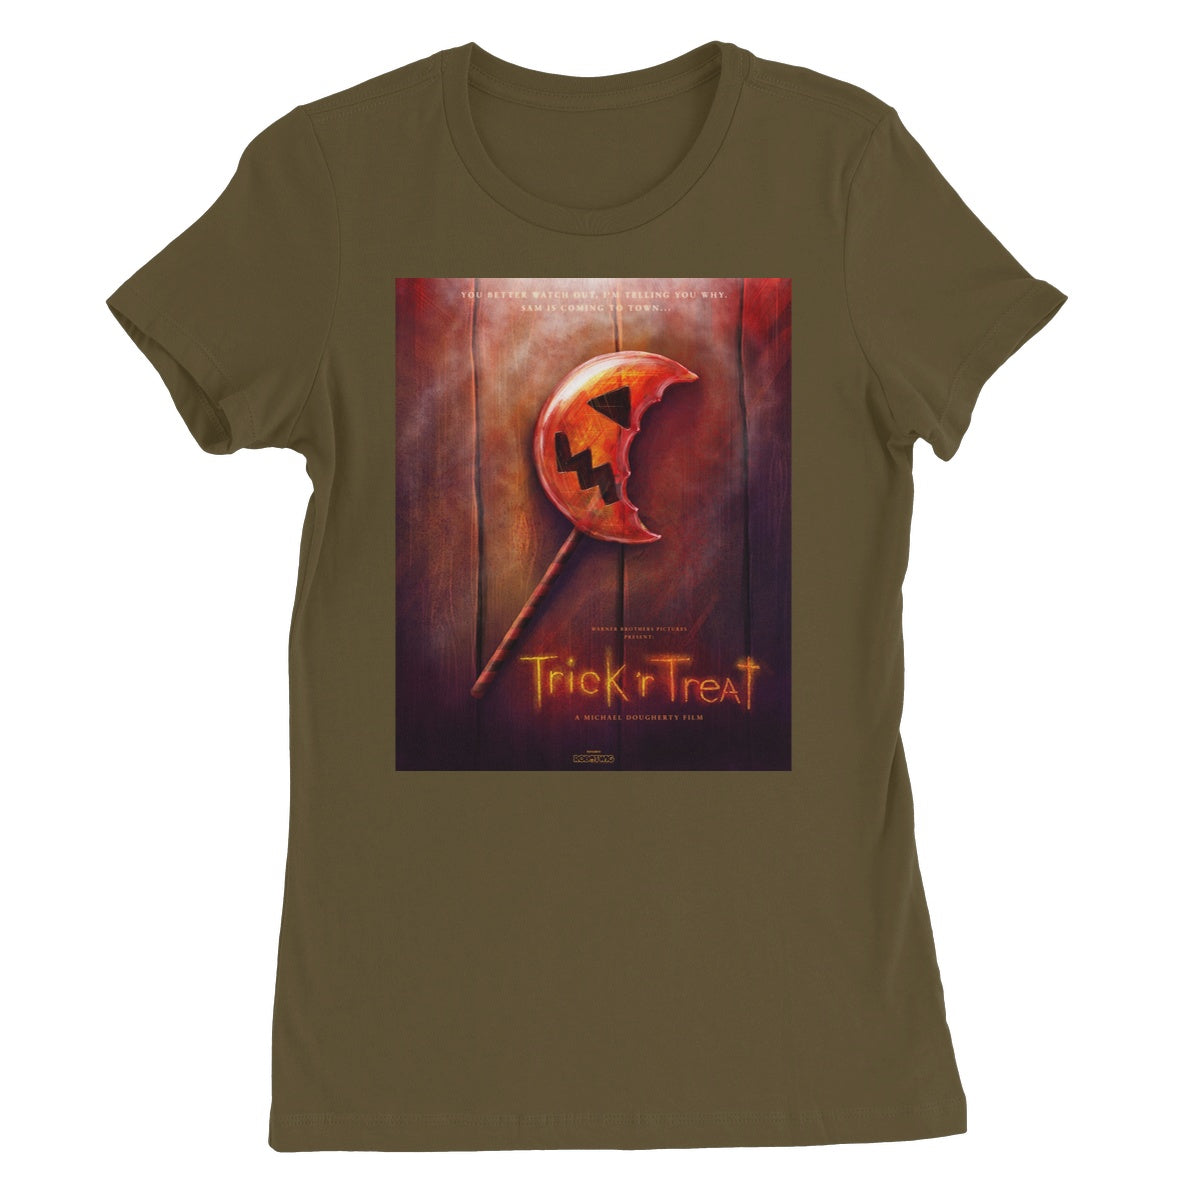 TrickrTreat Illustrated Women's Favourite T-Shirt